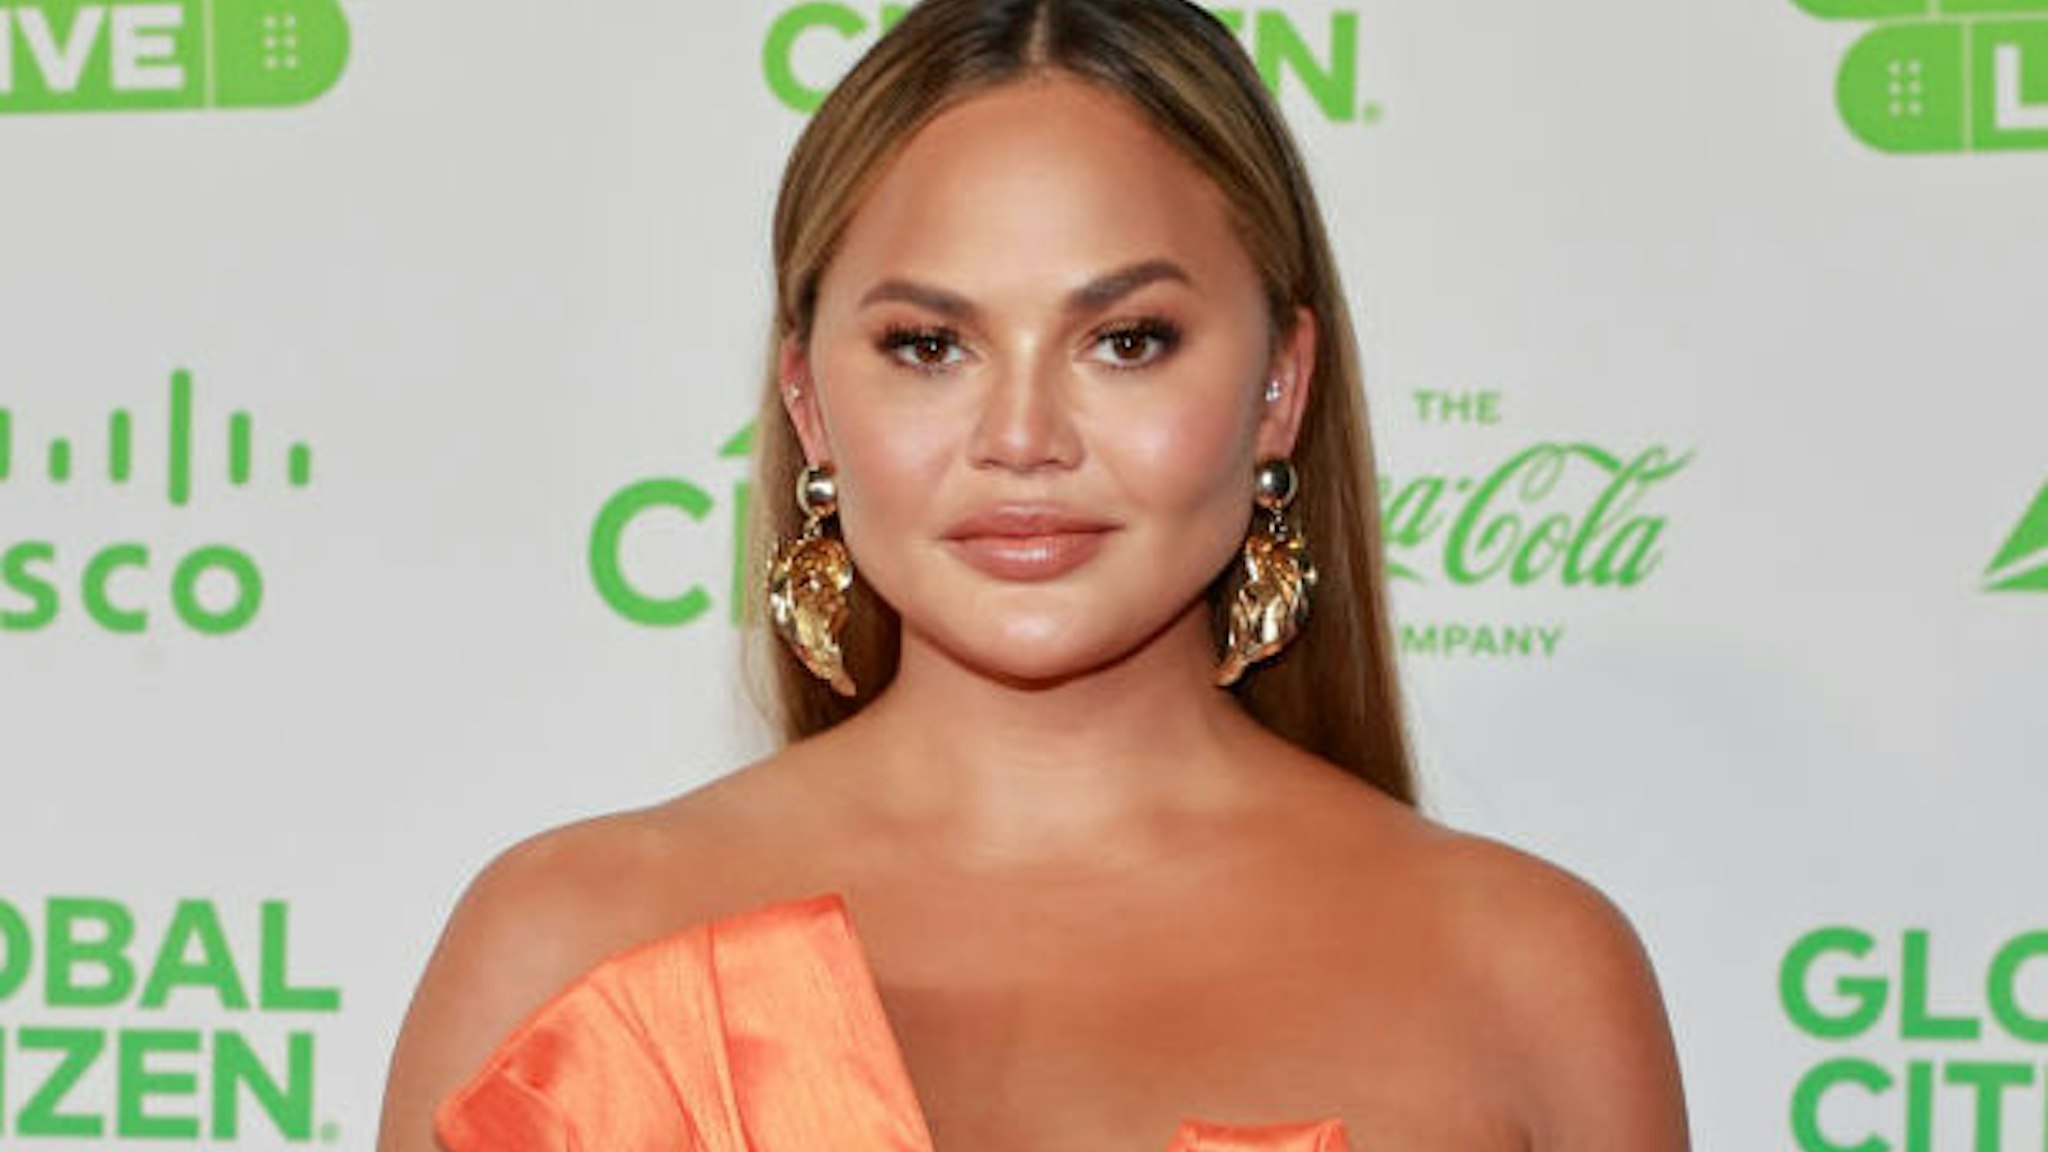 In this image released on May 2, Chrissy Teigen attends Global Citizen VAX LIVE: The Concert To Reunite The World at SoFi Stadium in Inglewood, California.